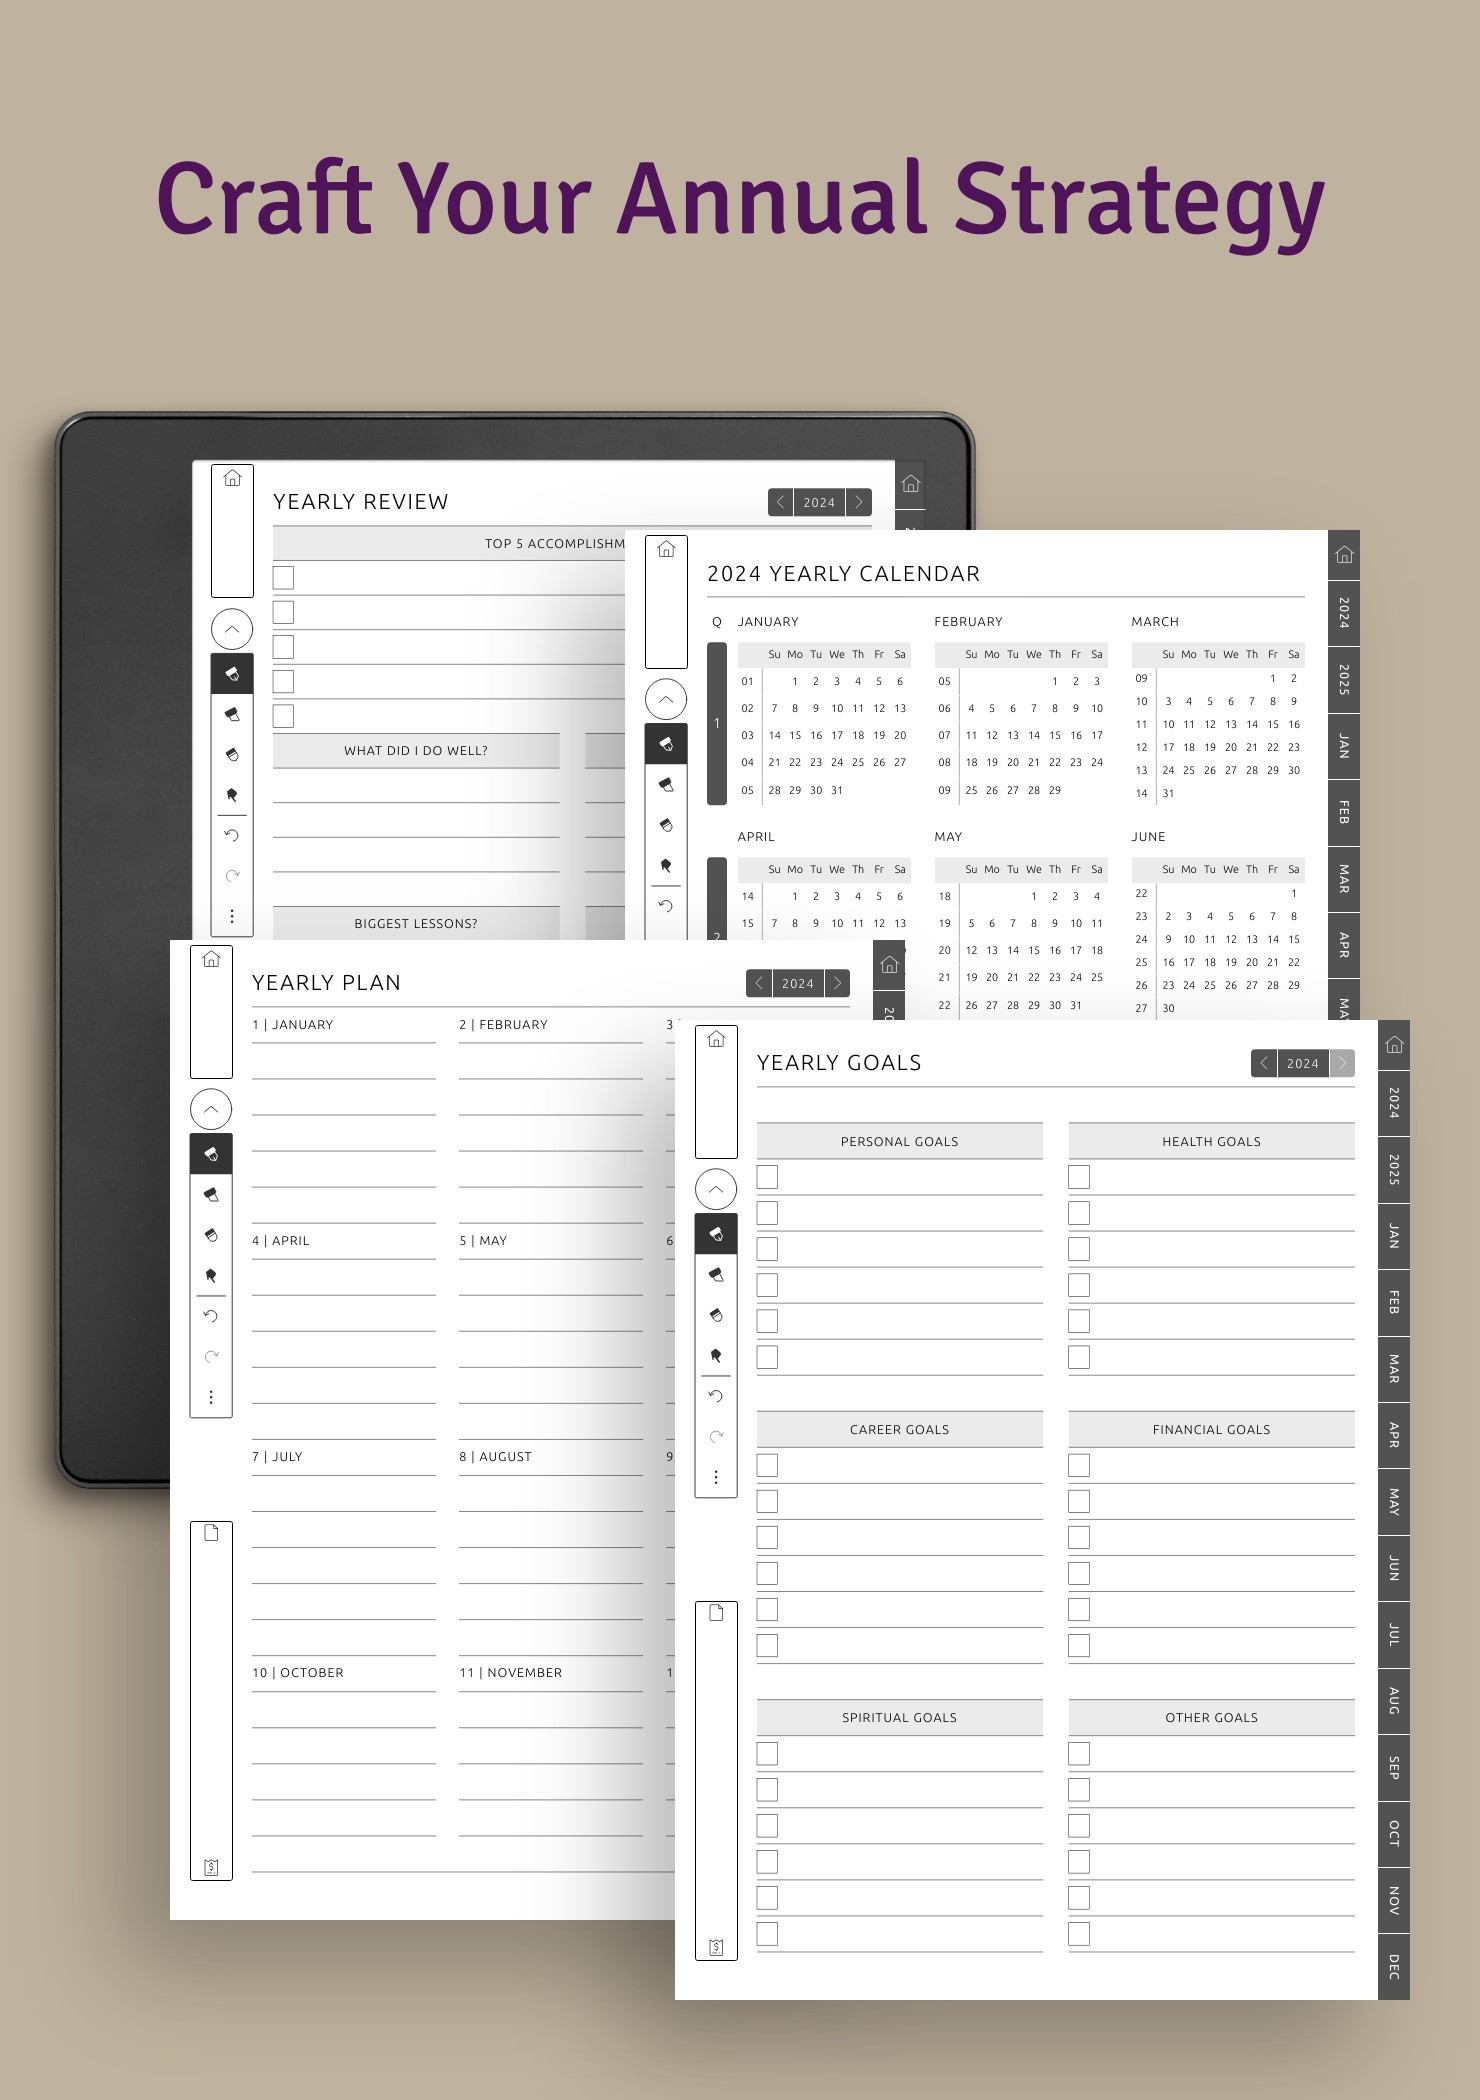 Annual templates for your strategic planning/